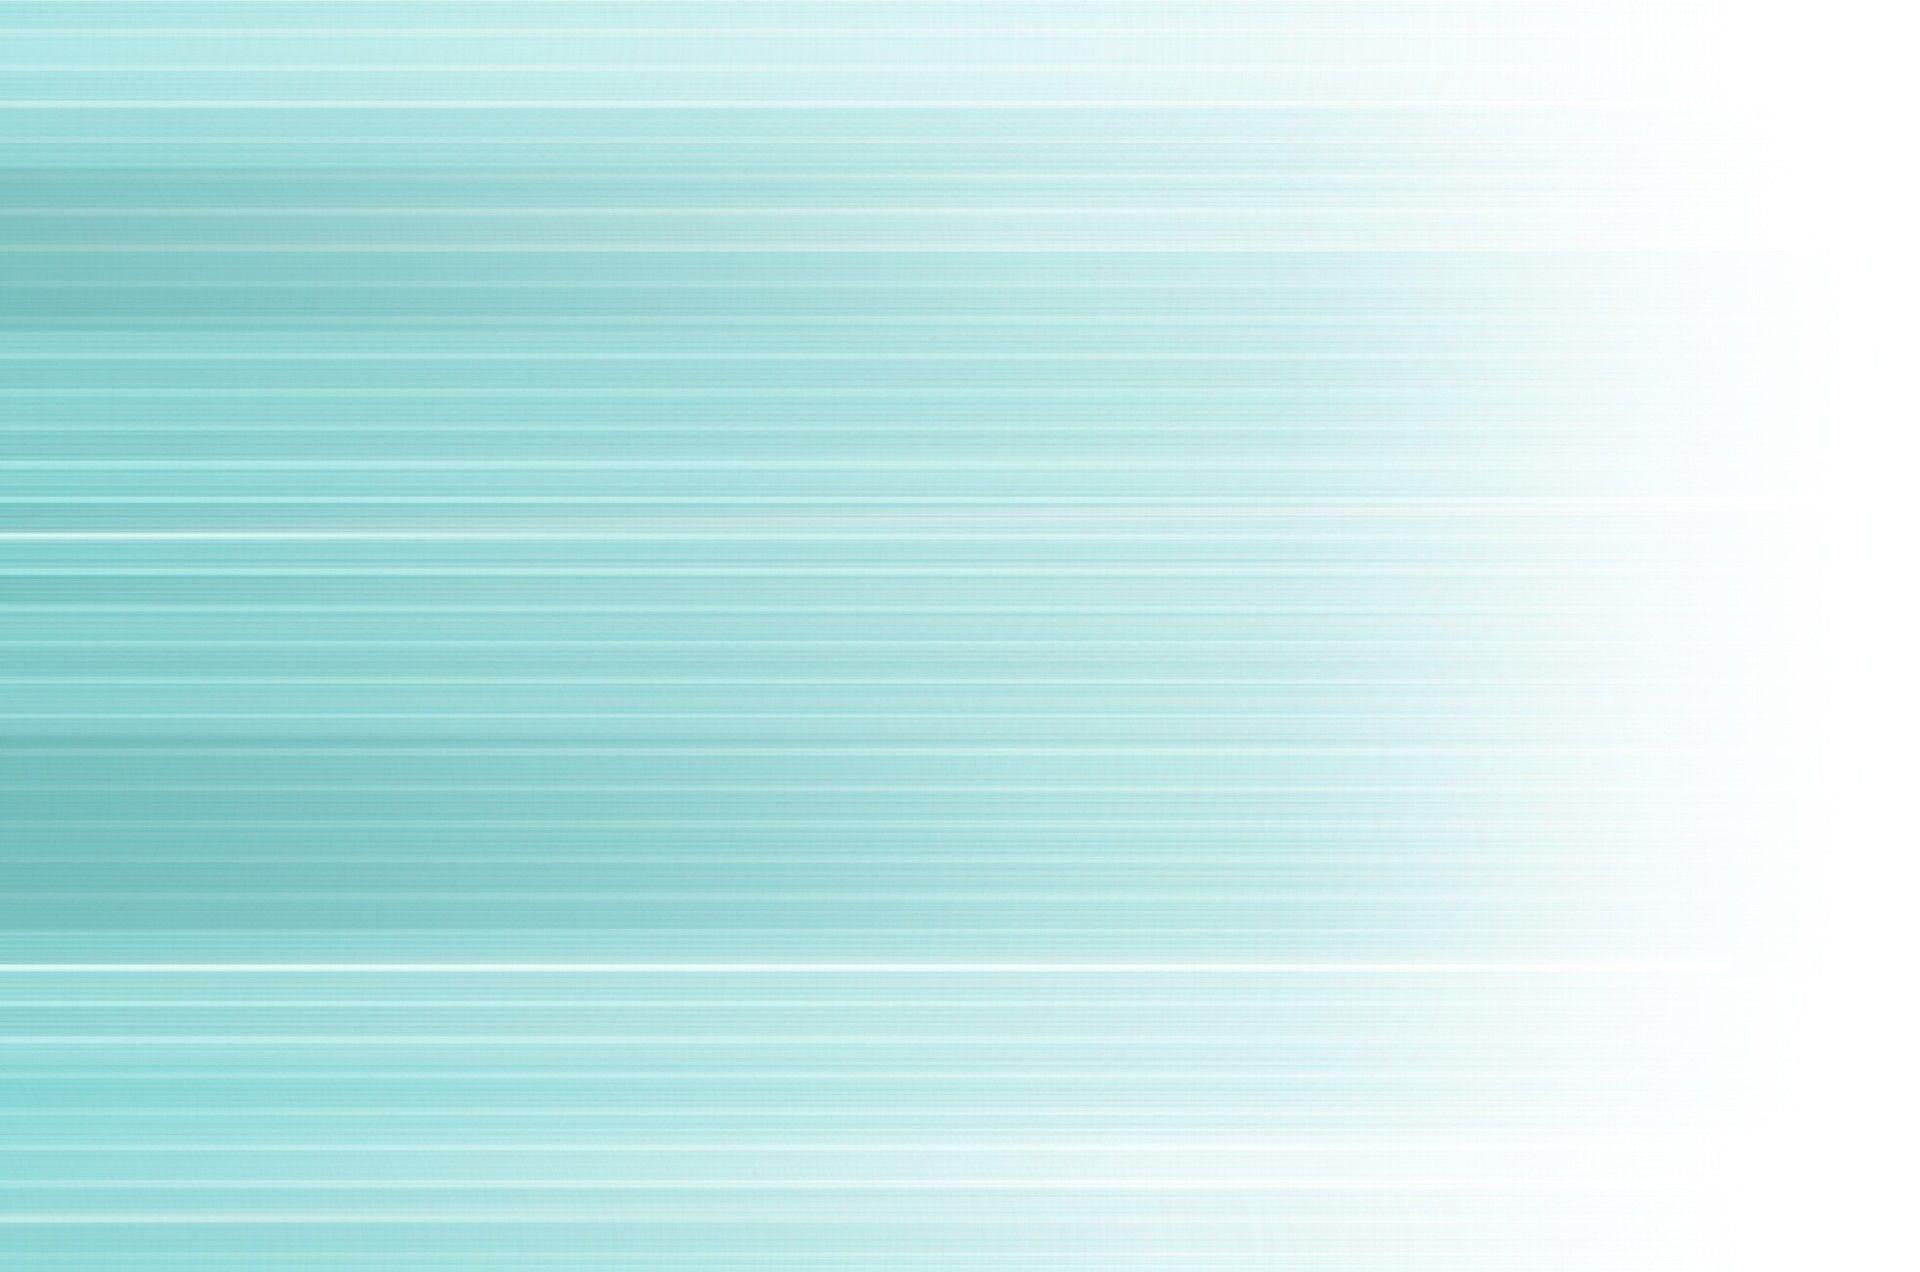 Teal Lines Background Texture Free Domain Picture